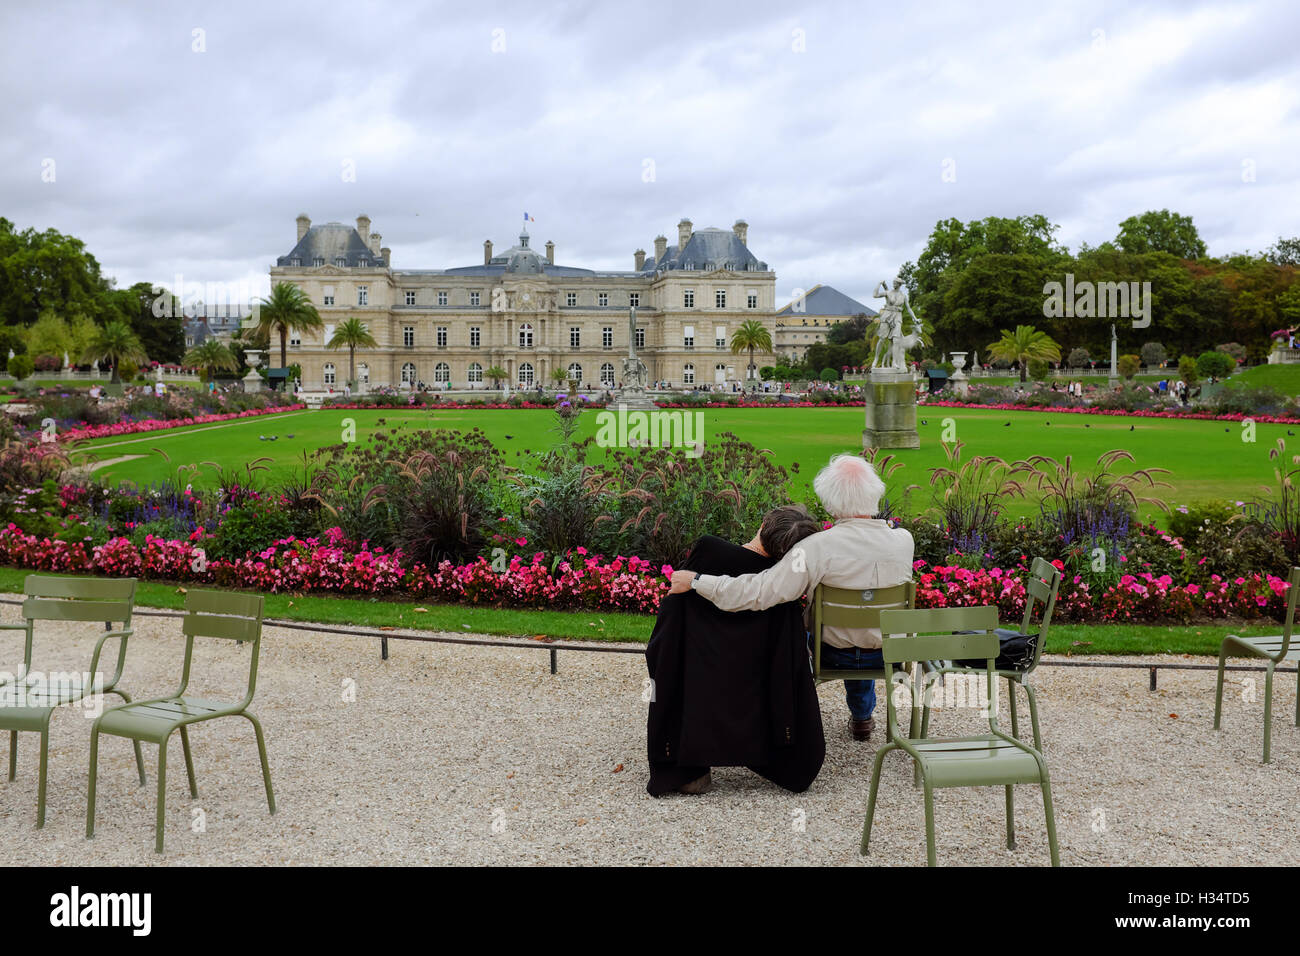 A couple embrace while enjoying the view of the Luxembourg Palace in Luxembourg Gardens in Paris, France. Stock Photo